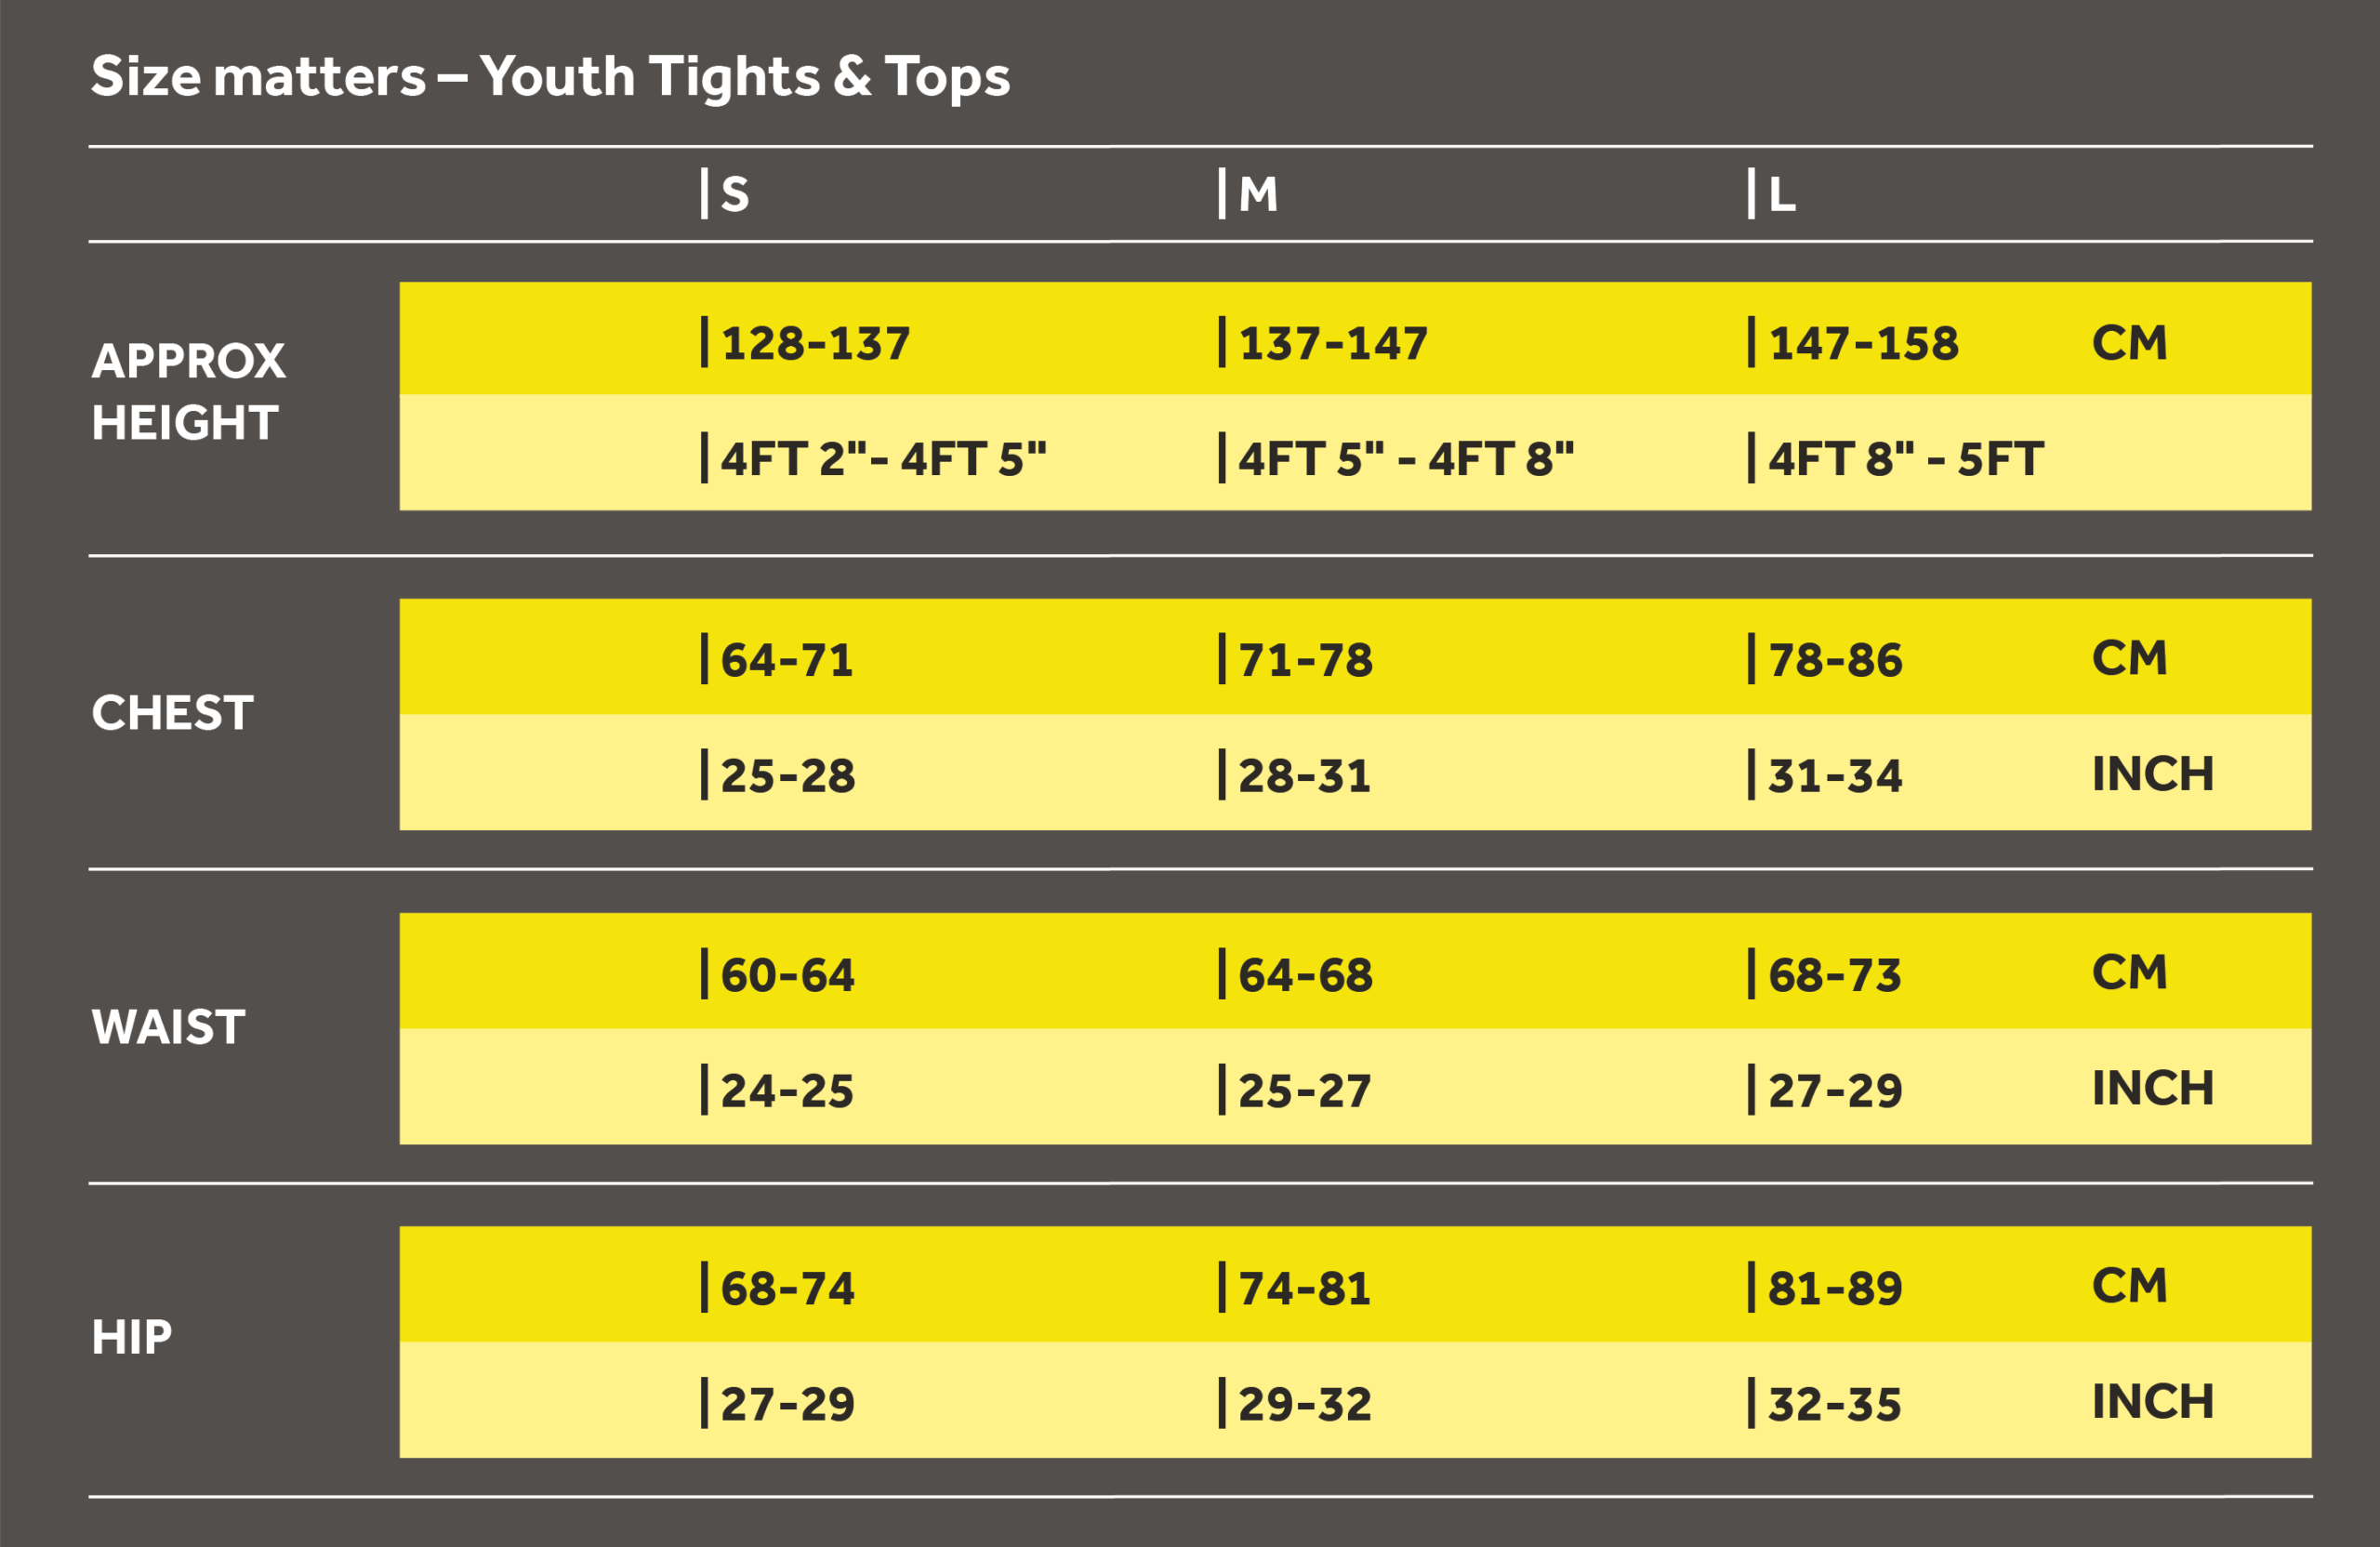 https://www.skinscompression.com/eu/wp-content/uploads/sites/14/2023/02/Youth-Tights-and-Tops-Size-Chart-Dark.png